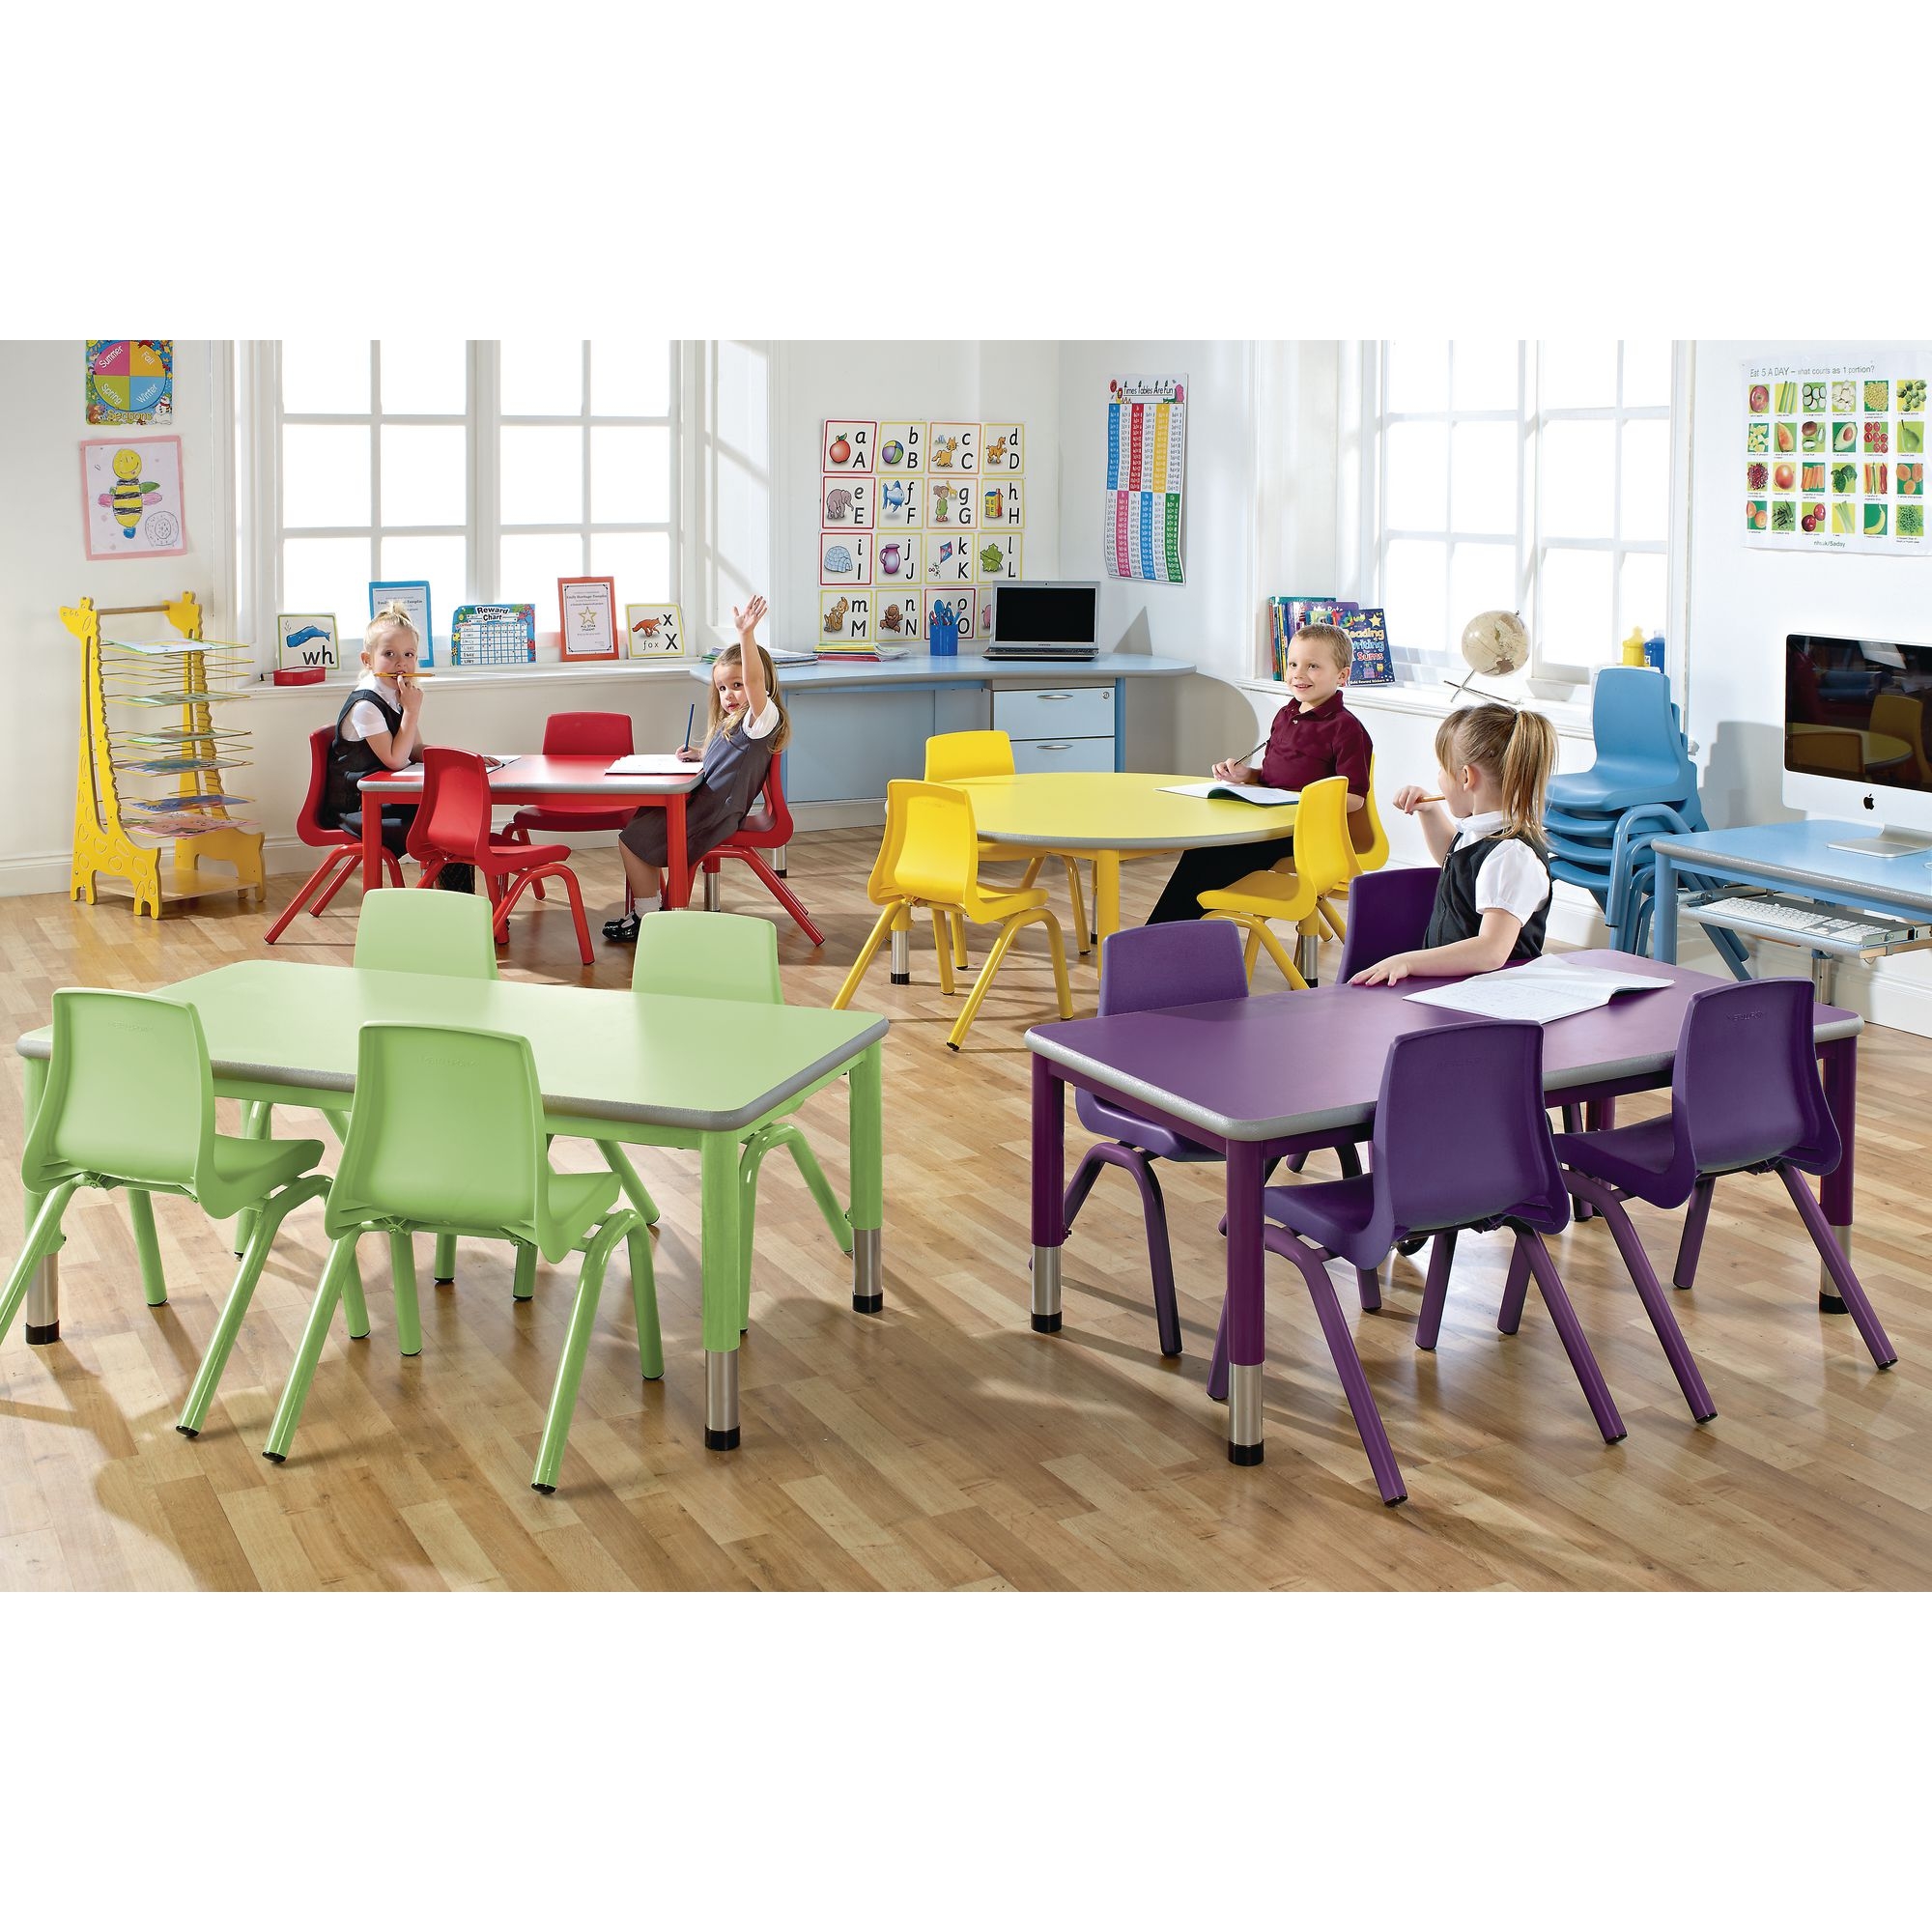 Harlequin Rectangular Height Adjustable Steel Classroom Pack: Table and 4 Chairs - 900 x 600 x 460mm - Purple